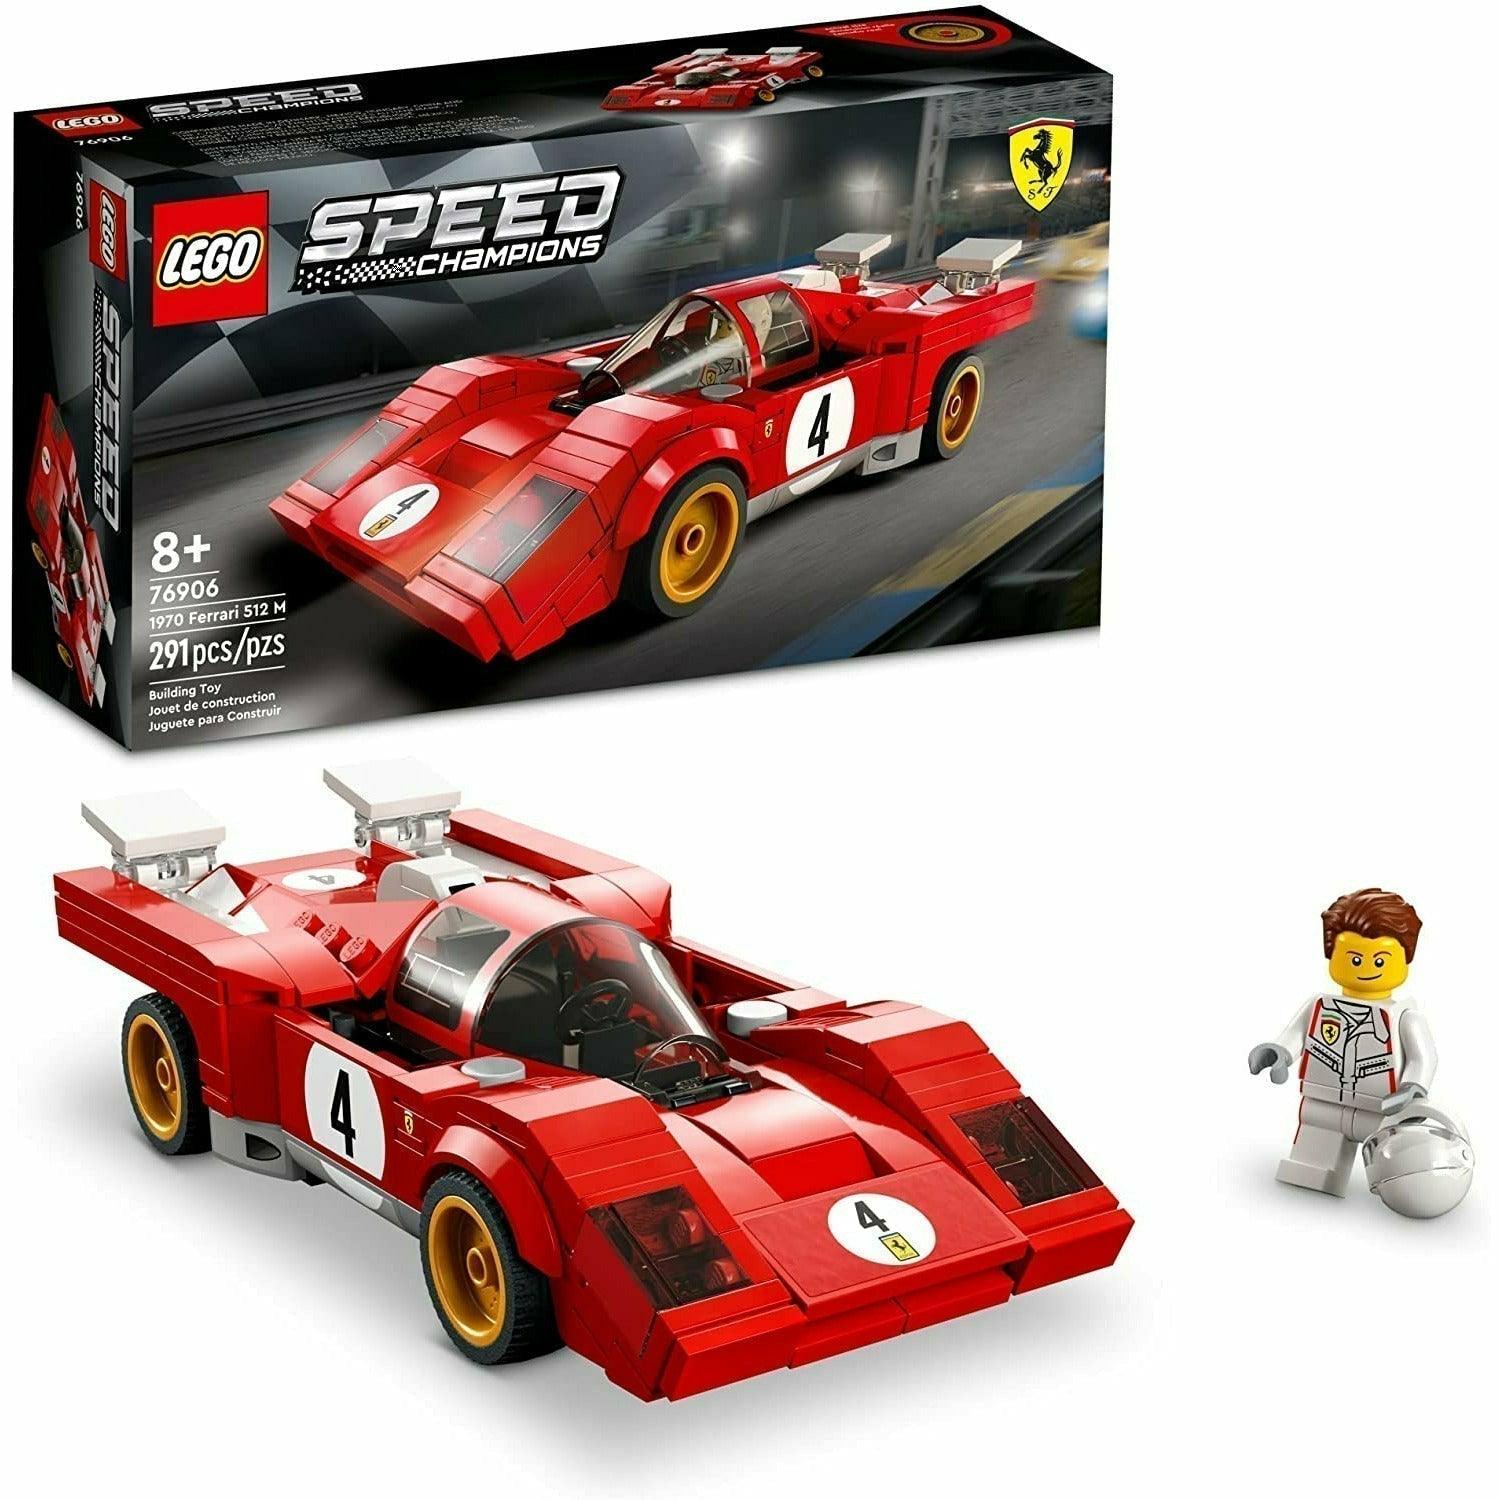 LEGO Speed Champions 1970 Ferrari 512 M 76906 Collectible Recreation of An Iconic Race Car Includes A Driver Minifigure With A Racing Suit 291 Pieces - BumbleToys - 8+ Years, 8-13 Years, Boys, Cars, Ferrari, LEGO, OXE, Pre-Order, Speed Champions